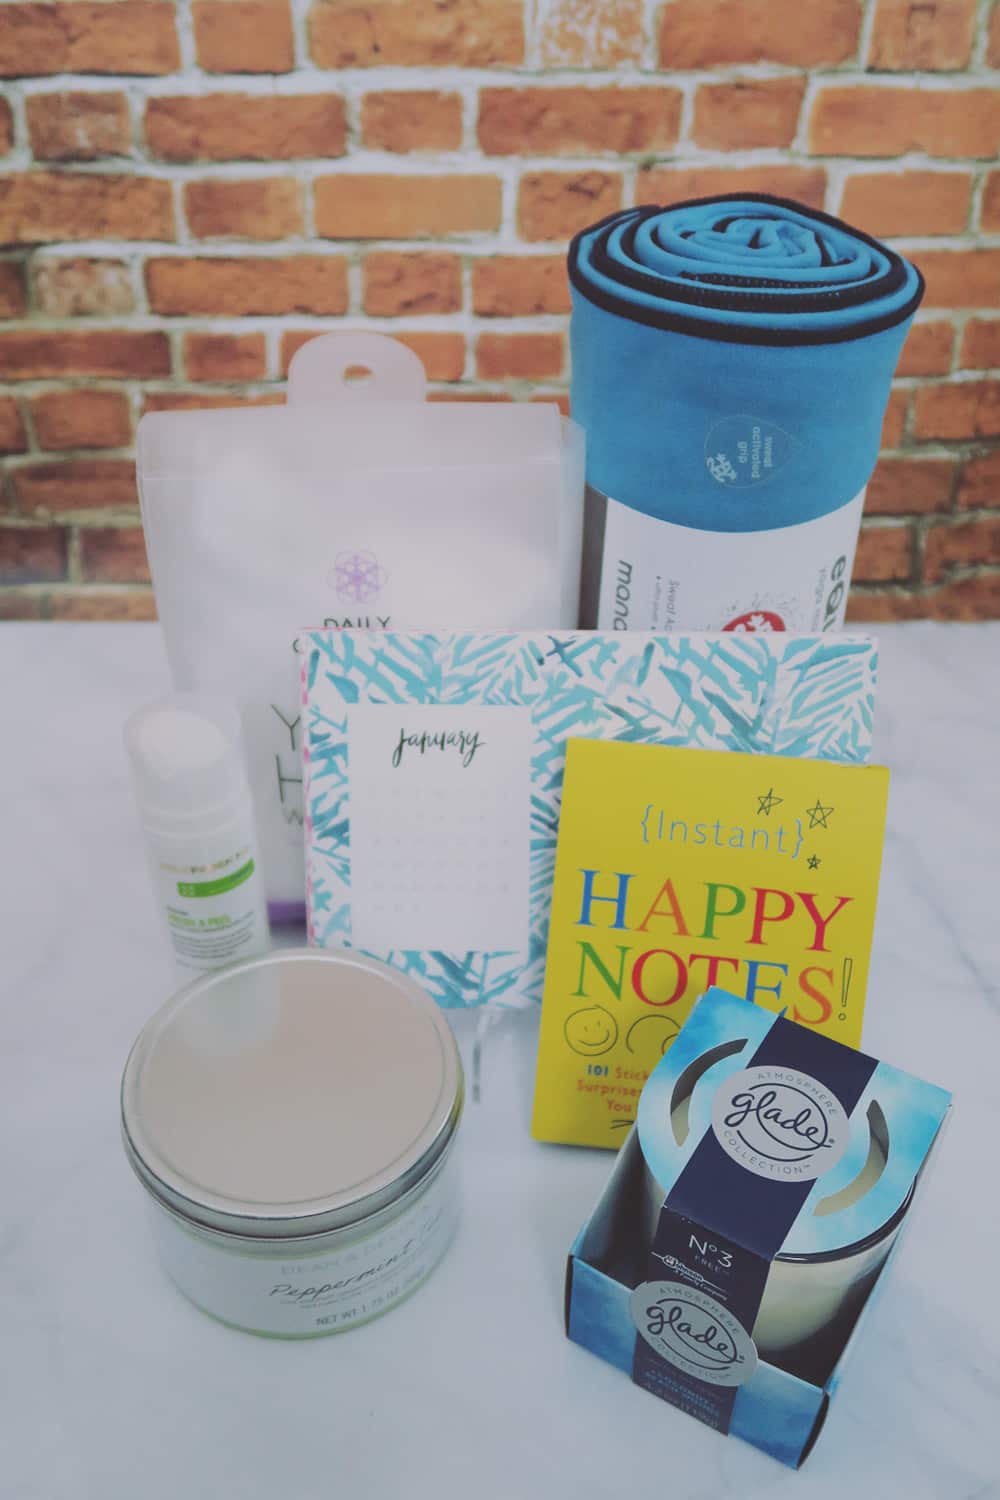 A review of the January Must Have Box from POPSUGAR.